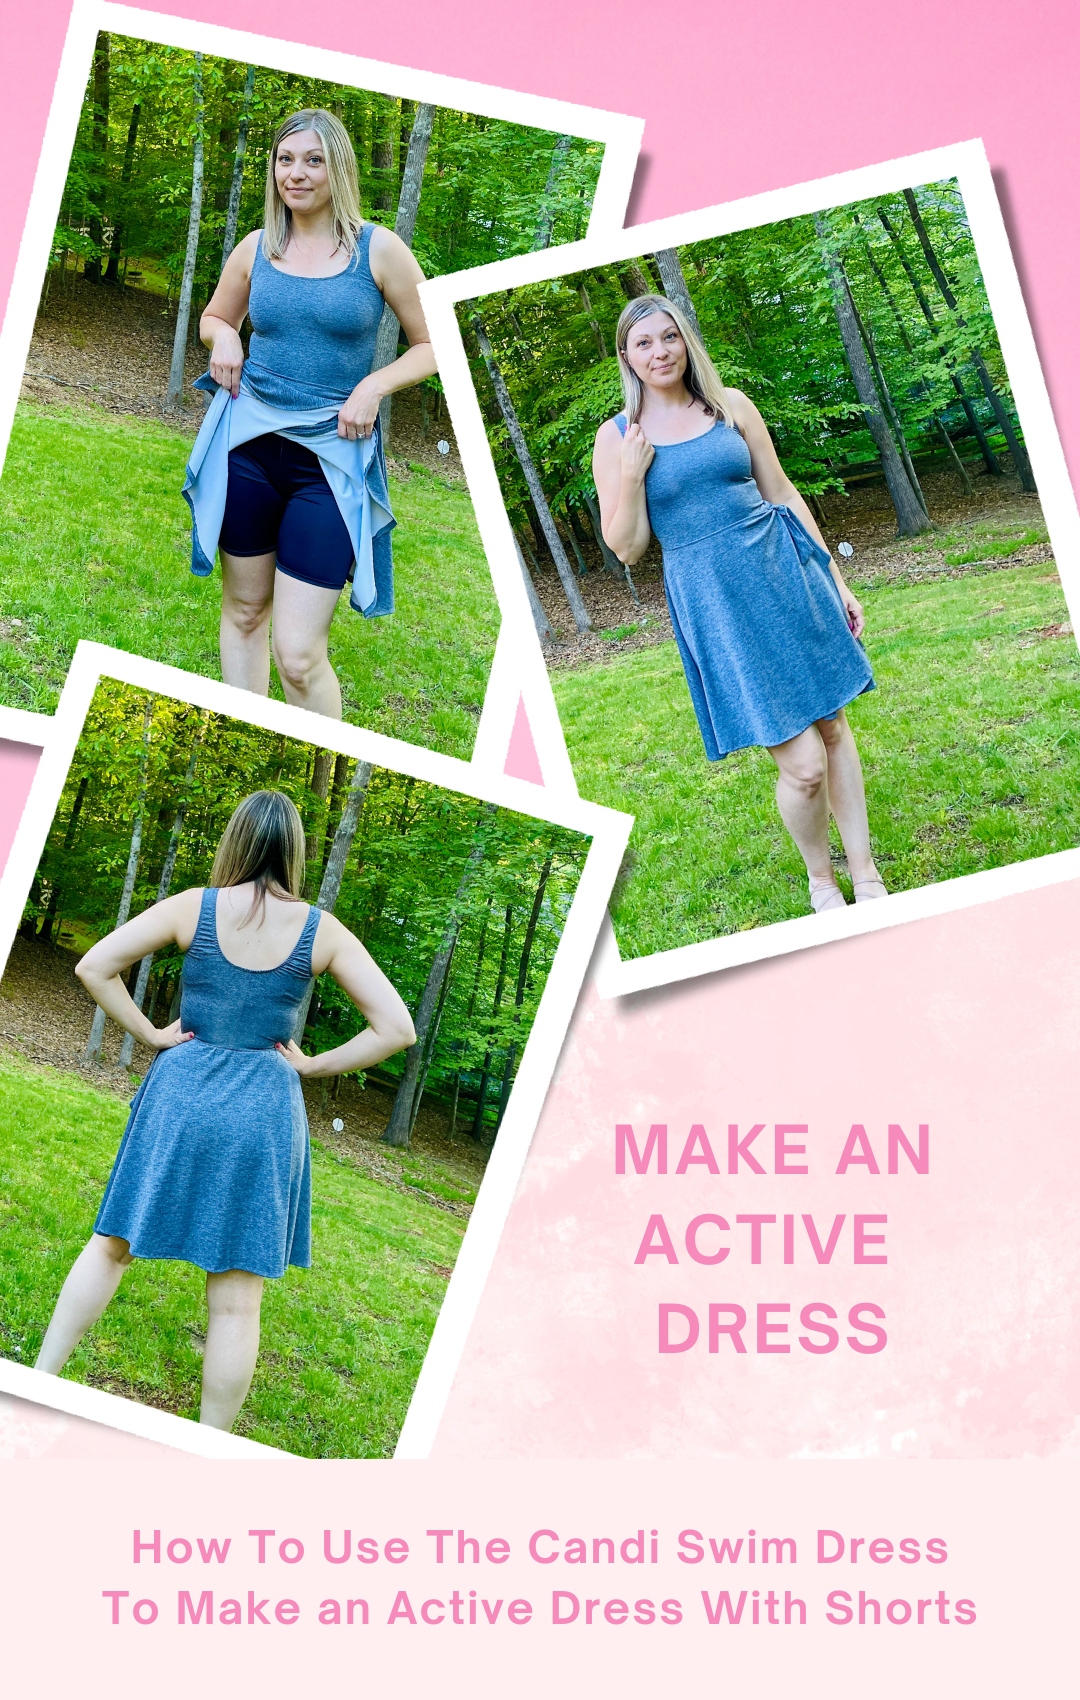 Candi Swim Dress Hack - Making an Active Dress With Built-in Shorties